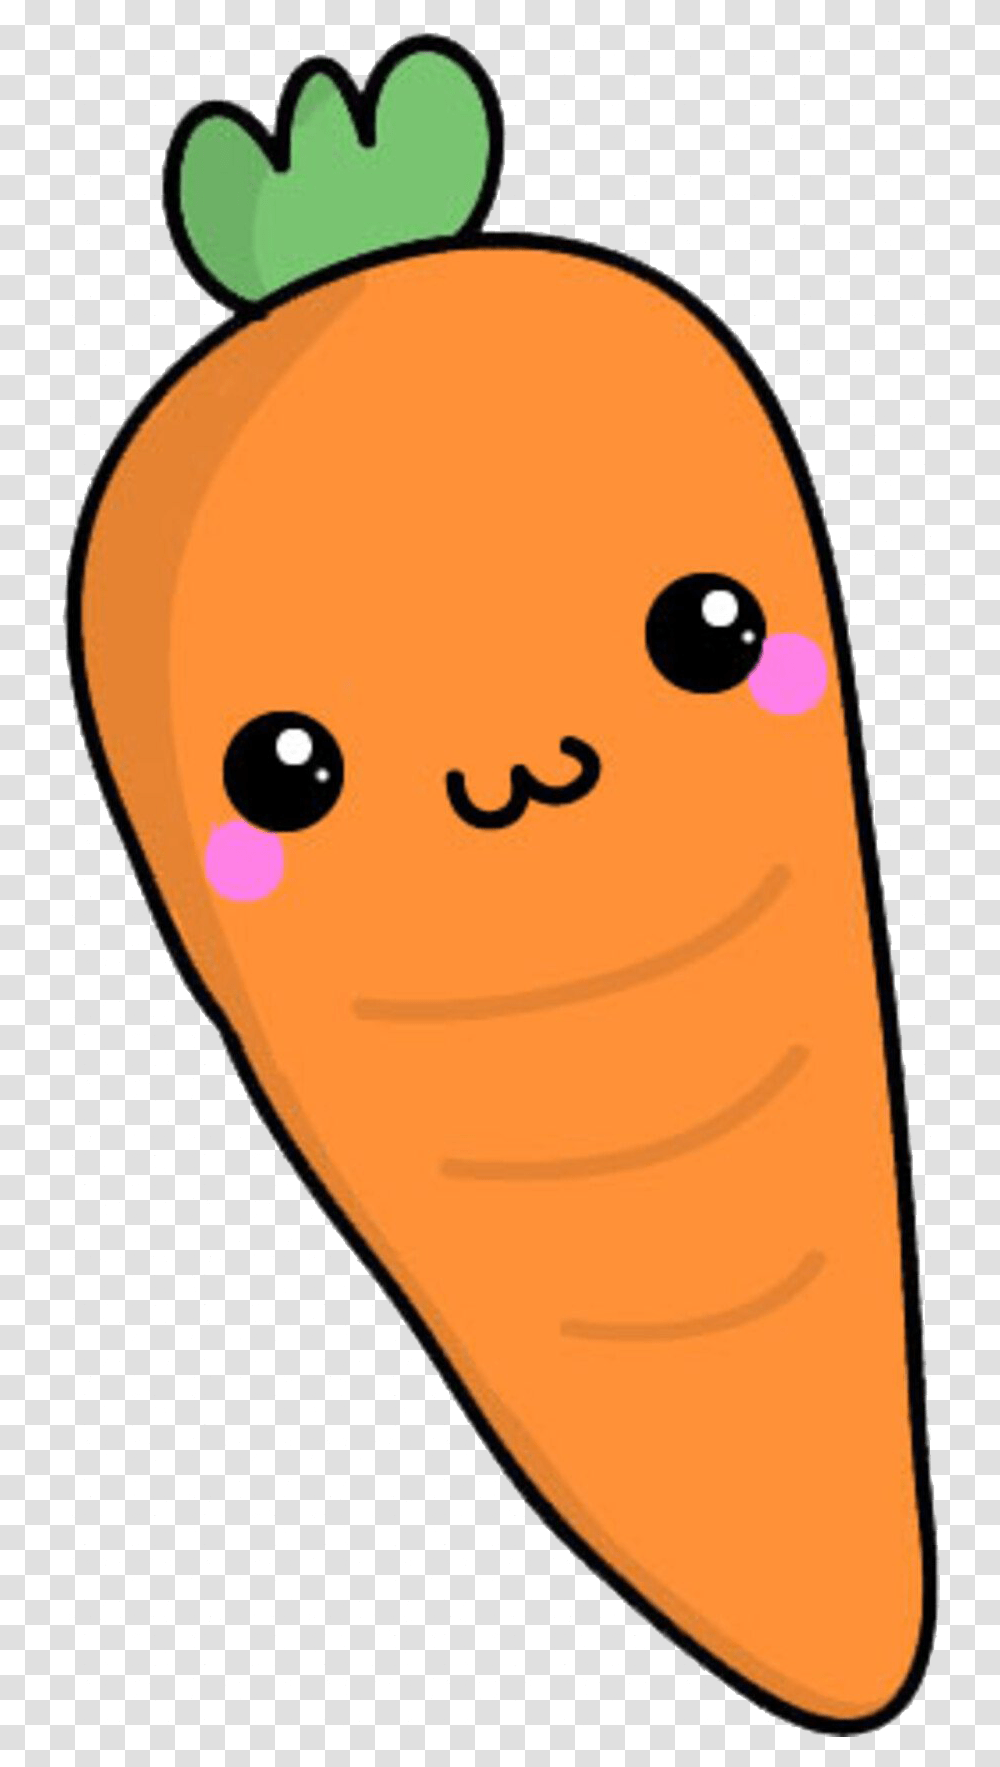 Cute Carrot Image, Plant, Food, Sweets, Vegetable Transparent Png